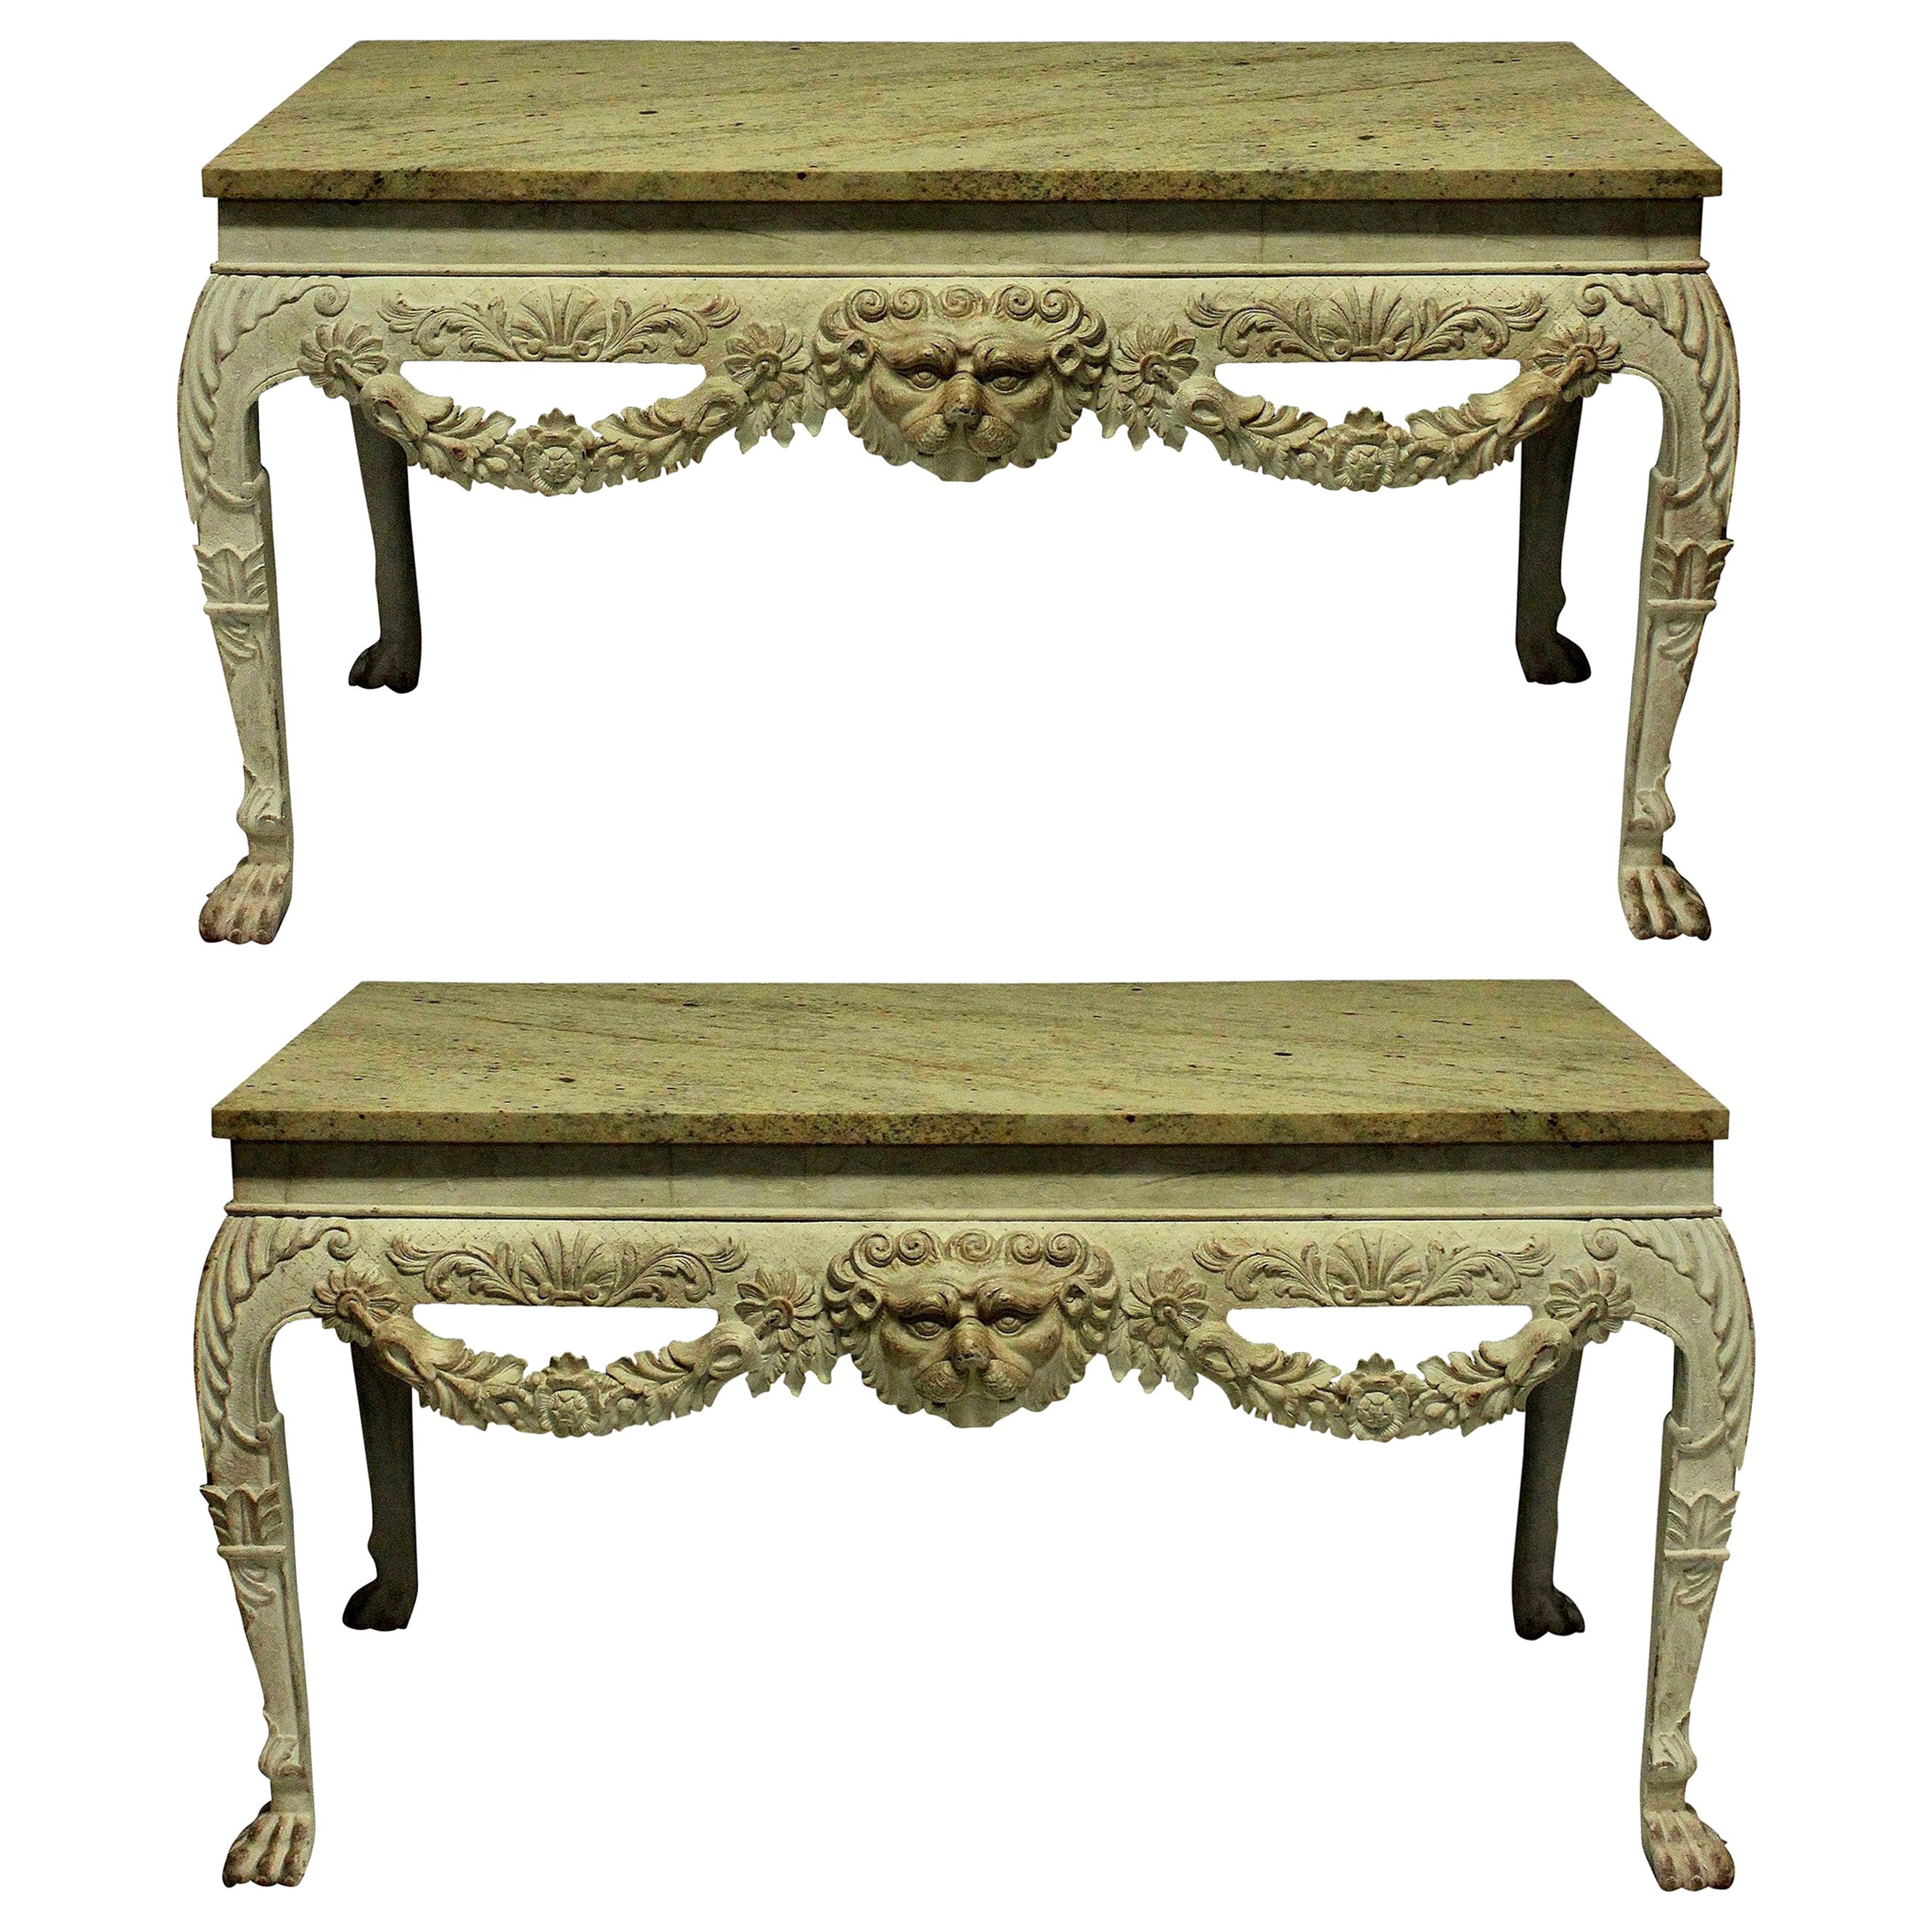 Pair of English George II Style Painted and Carved Mahogany Console Tables